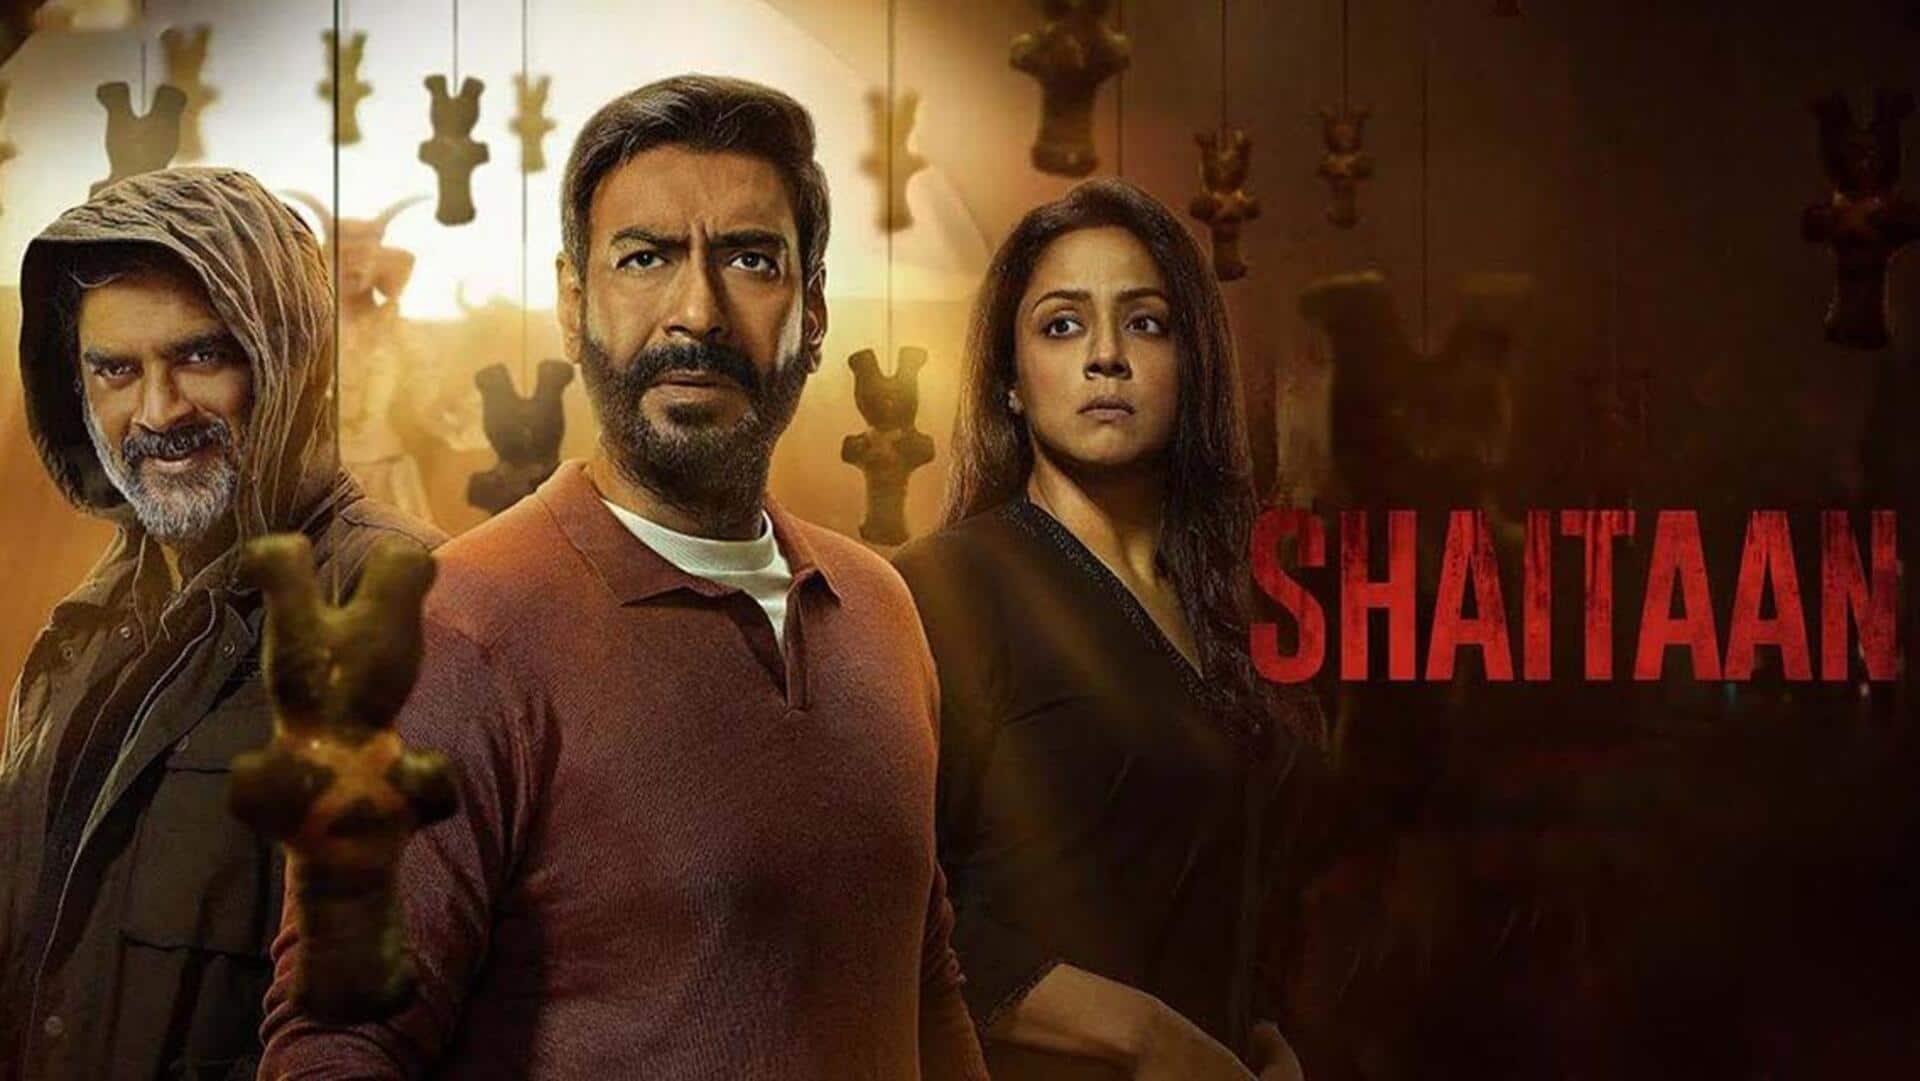 Box office collection: 'Shaitaan' surpasses Rs. 100cr. mark in India